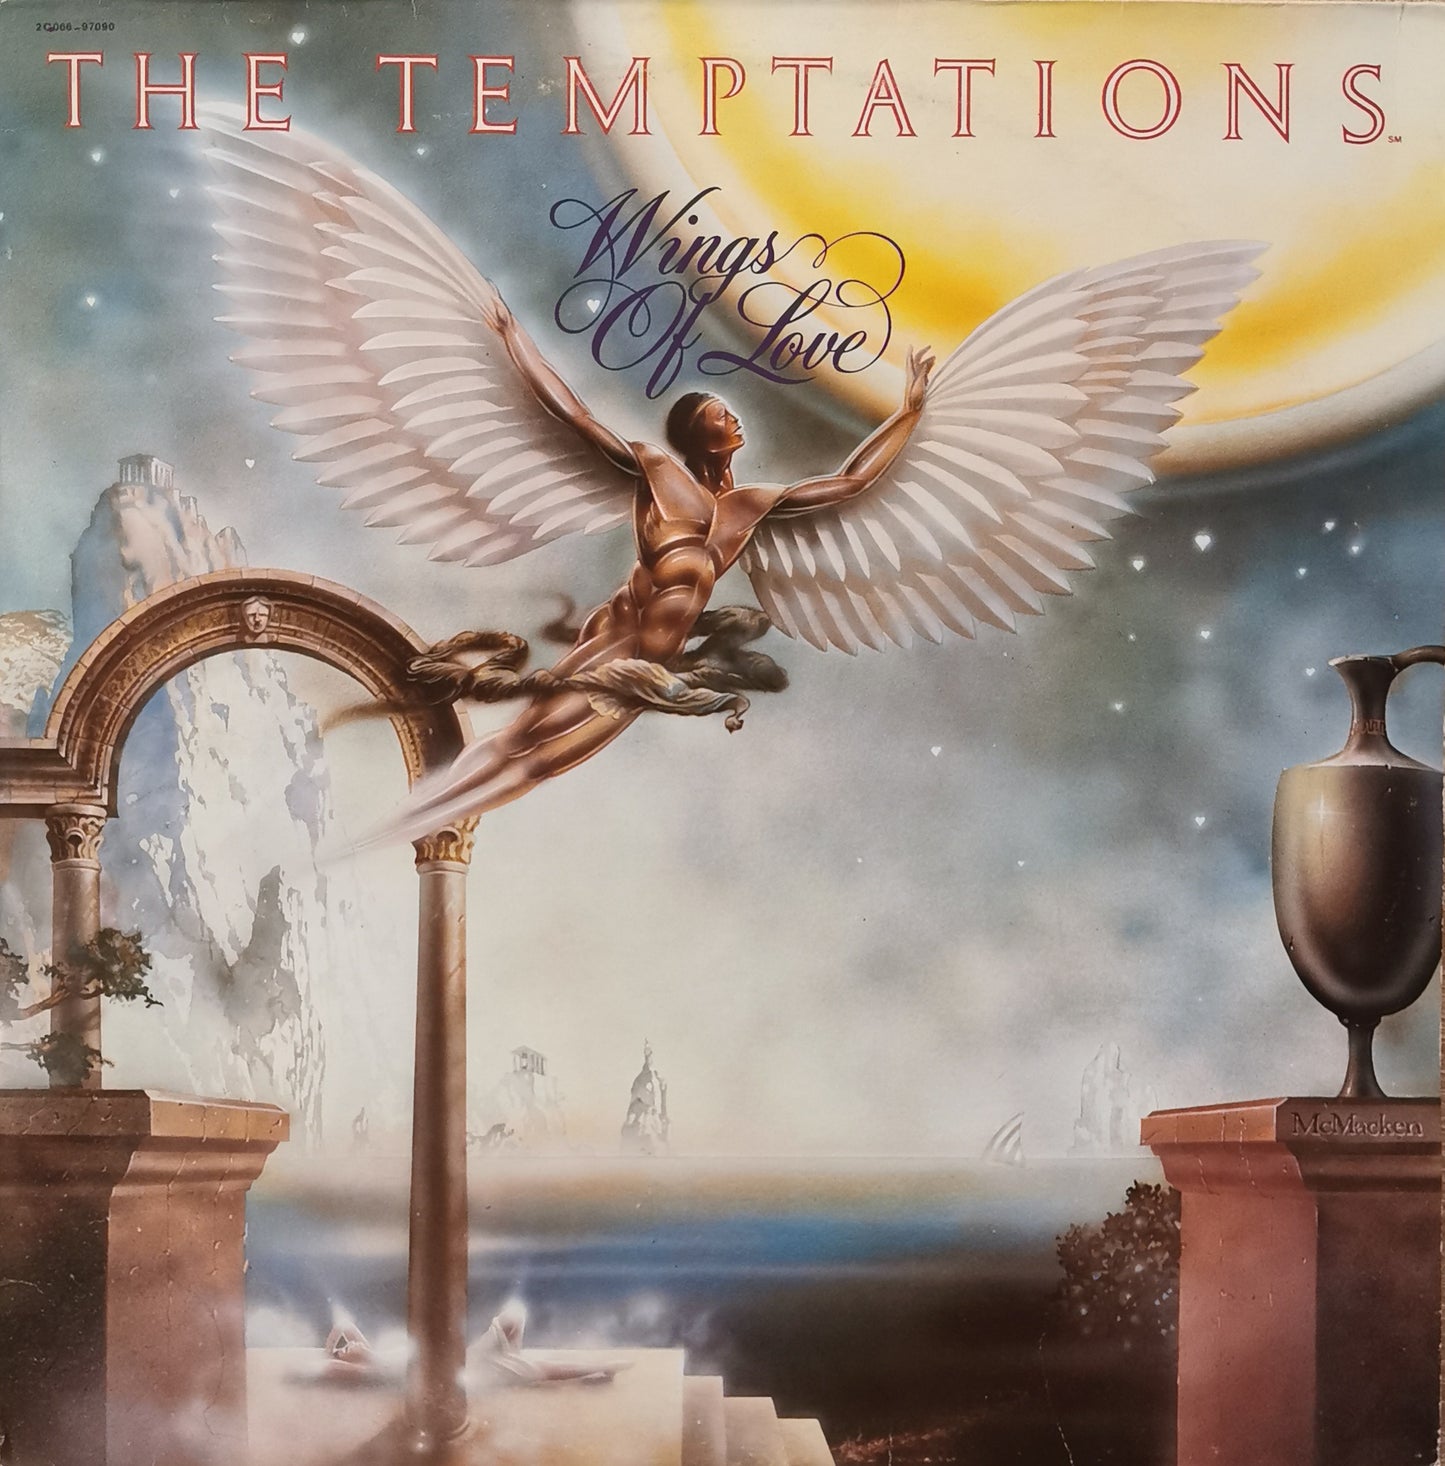 THE TEMPTATIONS - Wings Of Love